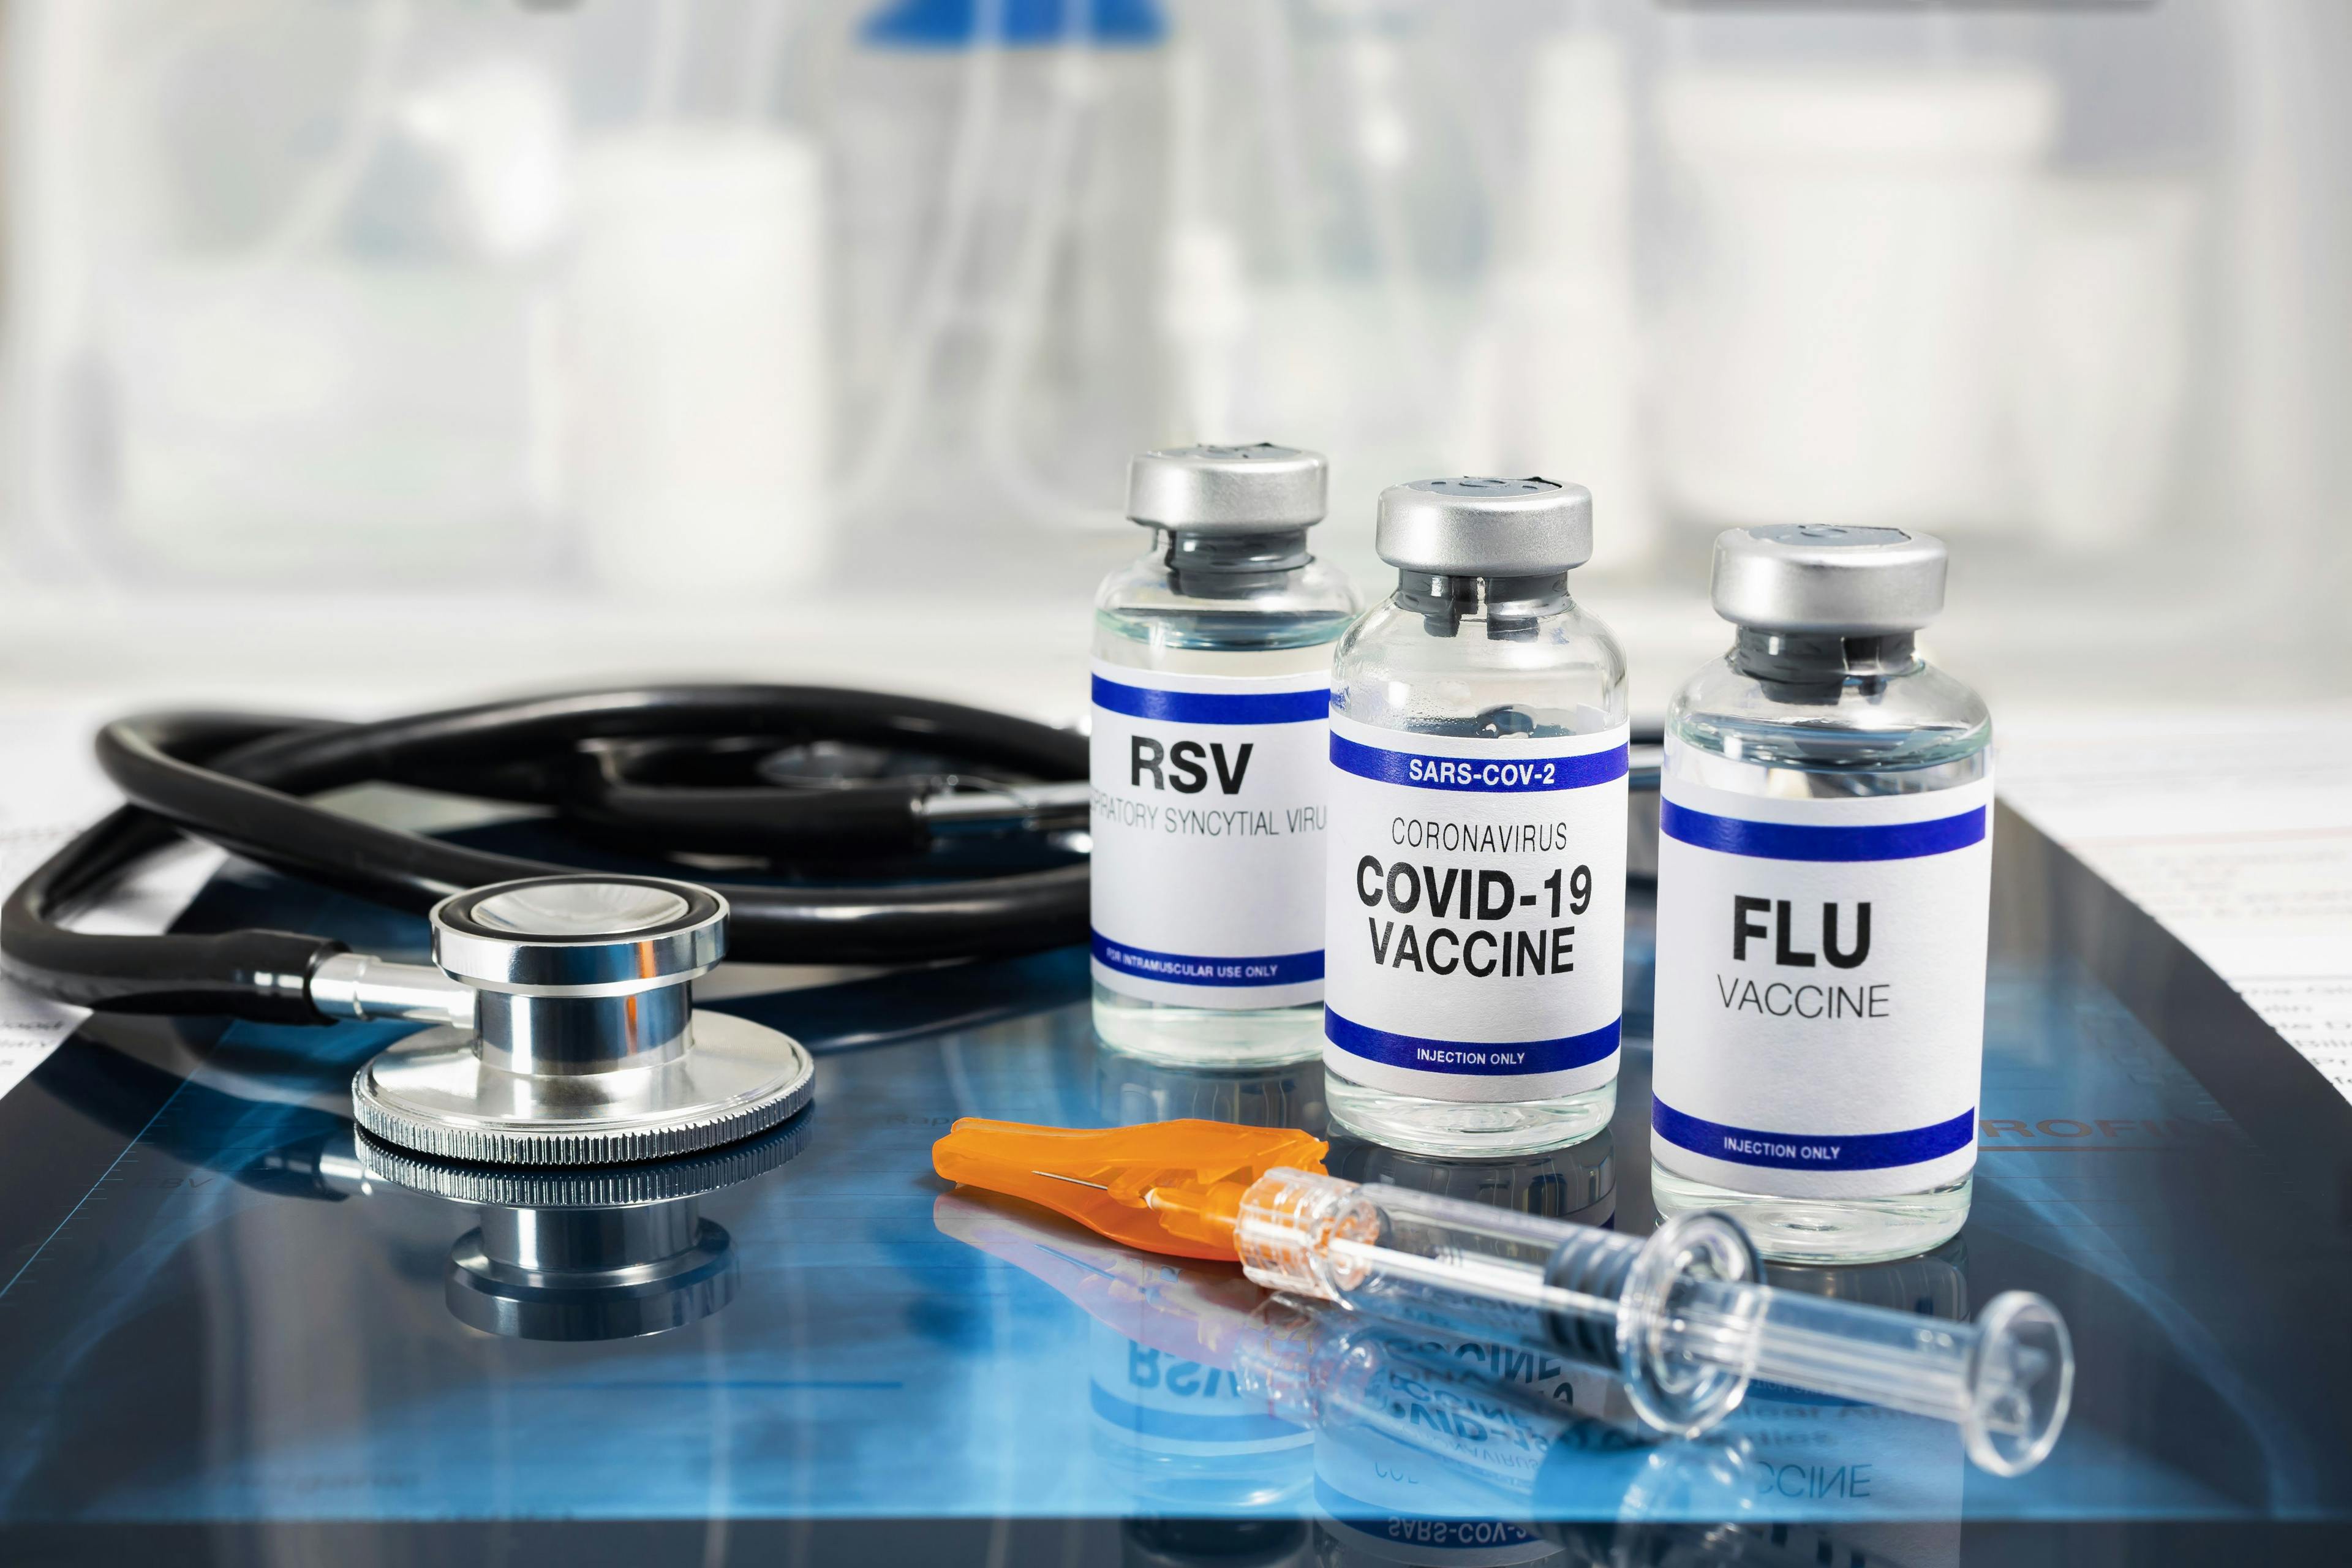 Bottles of vaccine for Influenza Virus, Respiratory Syncytial virus and Covid-19 for vaccination. Flu, RSV and Sars-cov-2 Coronavirus vaccine vials over Radiography pulmonar with stethoscope. Image credit: angellodeco - stock.adobe.com